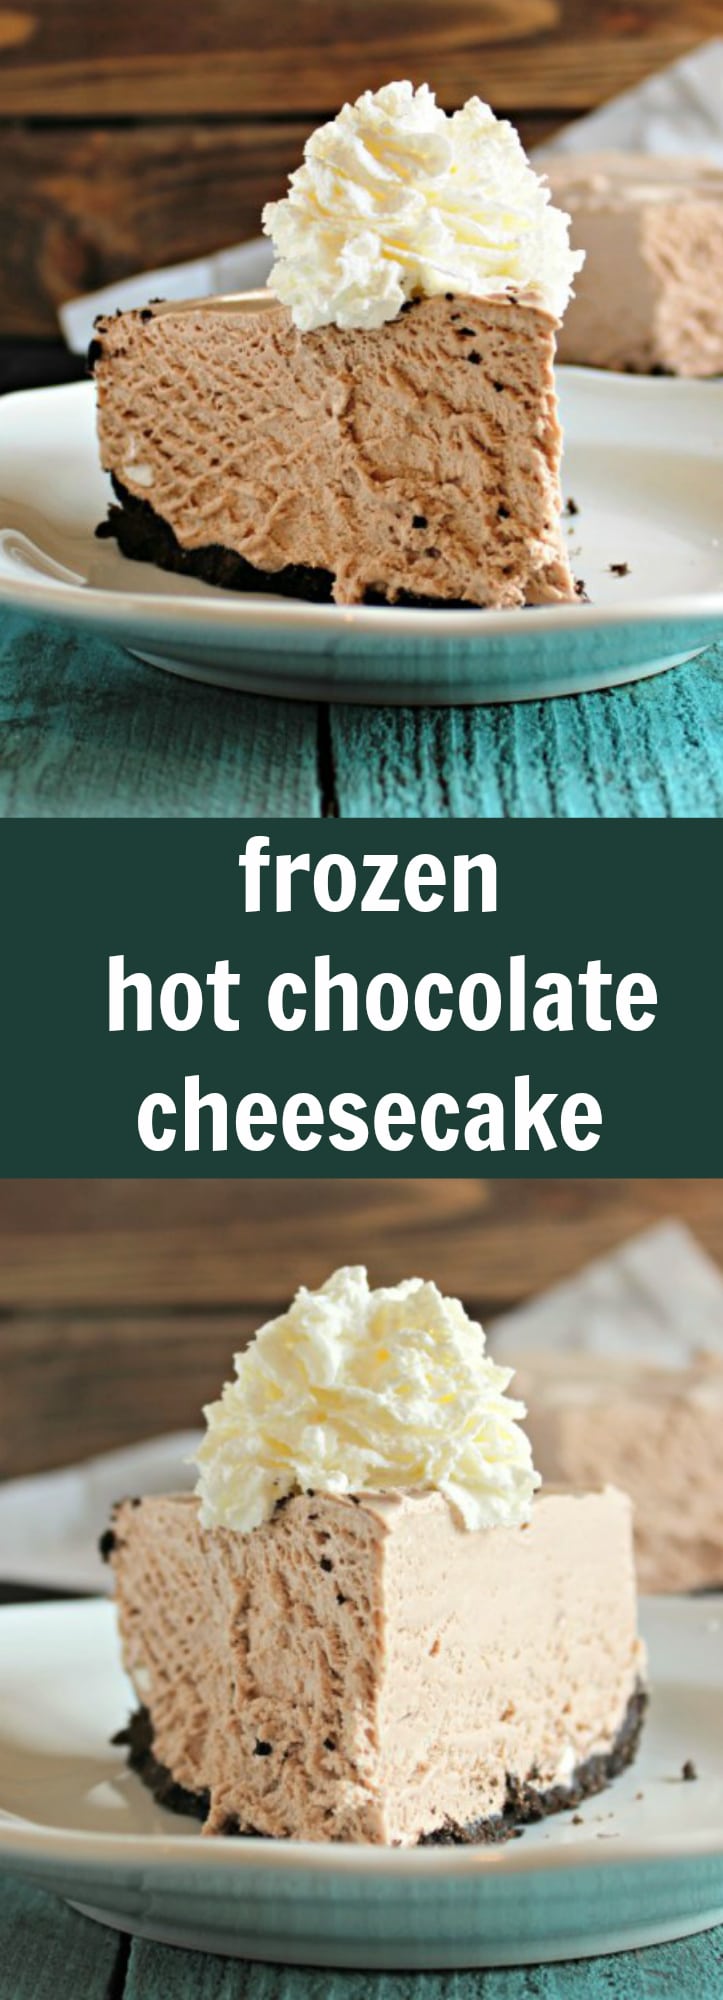 Simple, delicious, and easy frozen hot chocolate cheesecake